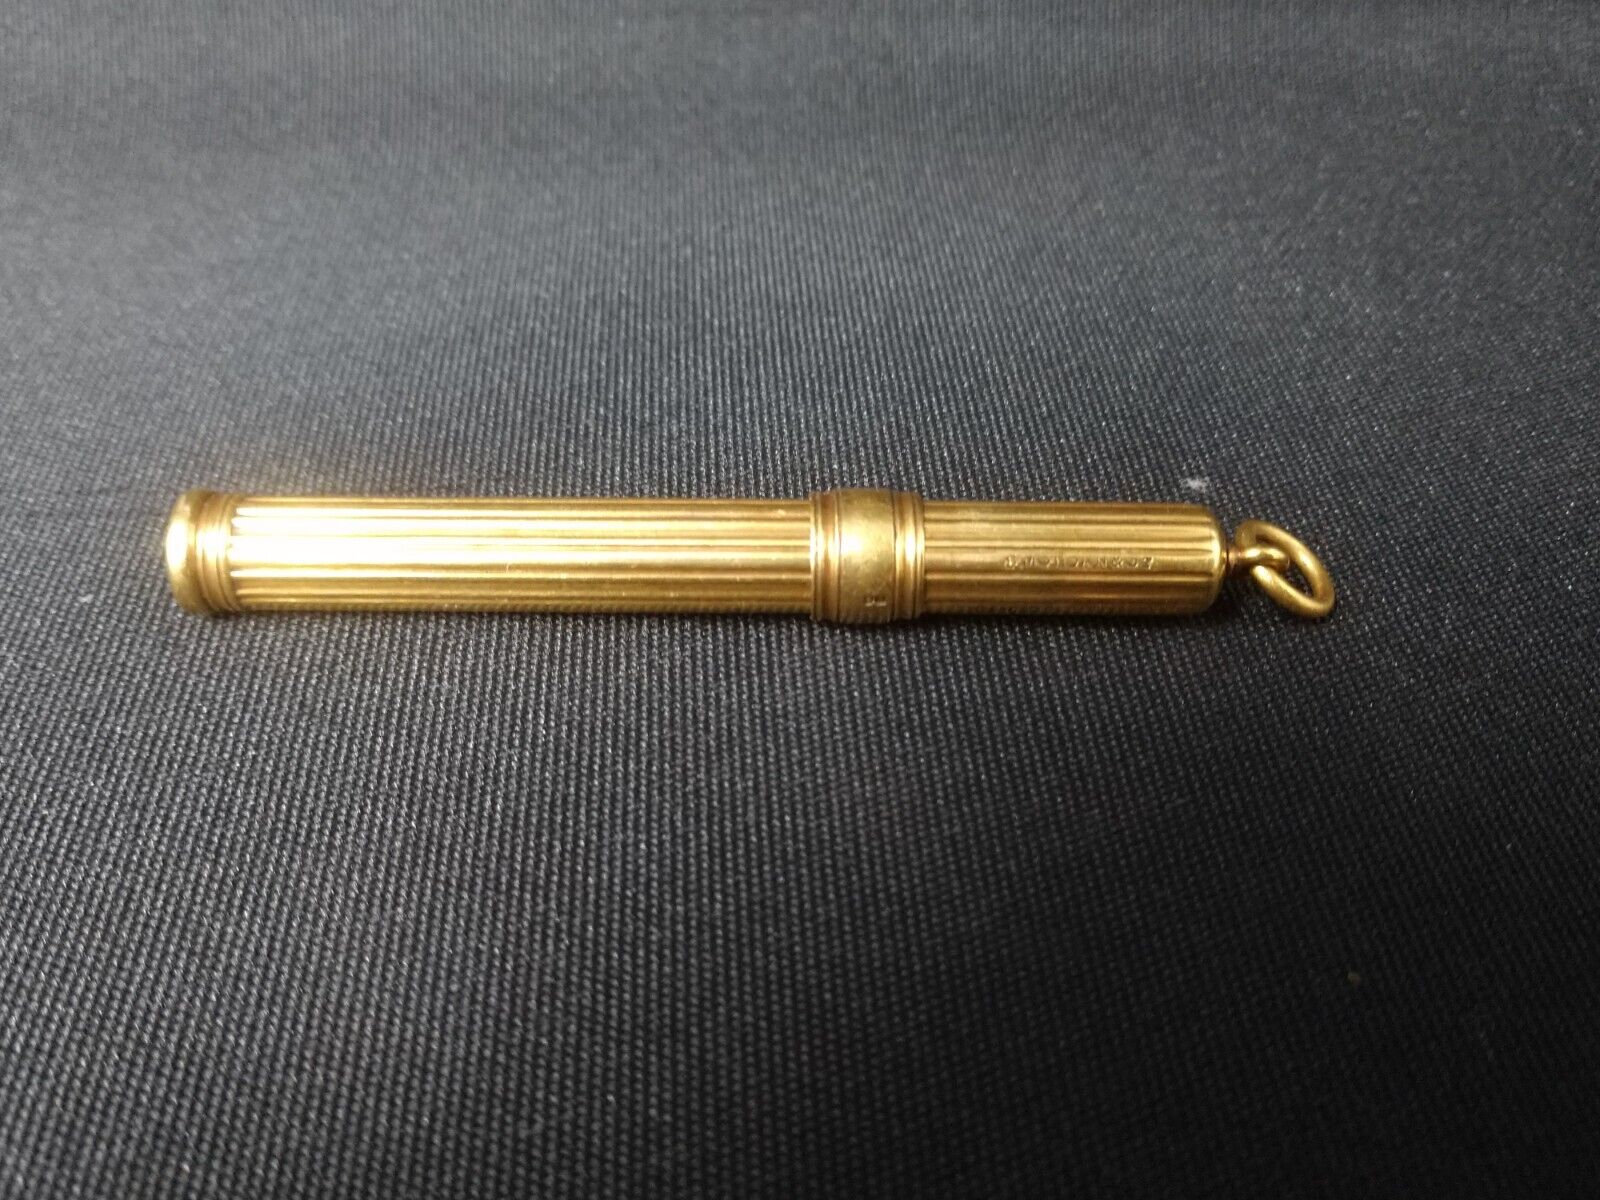 WORKING 18k Gold Propelling Pencil by Sampson Mordan 15.7g ANTIQUE 1800s